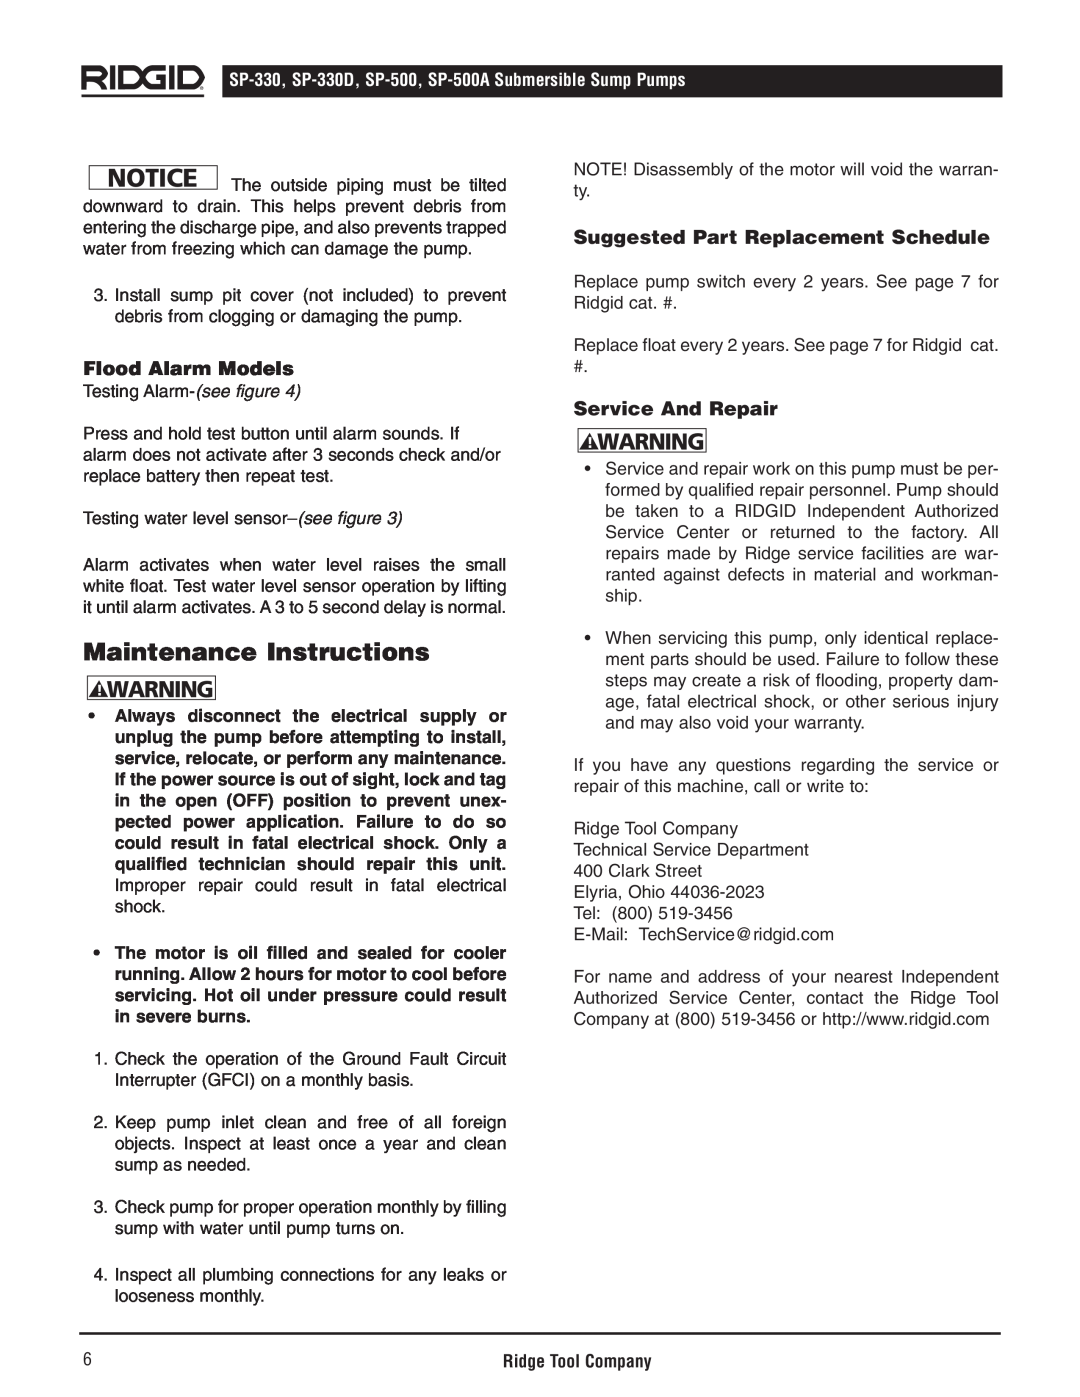 RIDGID SP500A manual Maintenance Instructions, Flood Alarm Models, Suggested Part Replacement Schedule, Service And Repair 